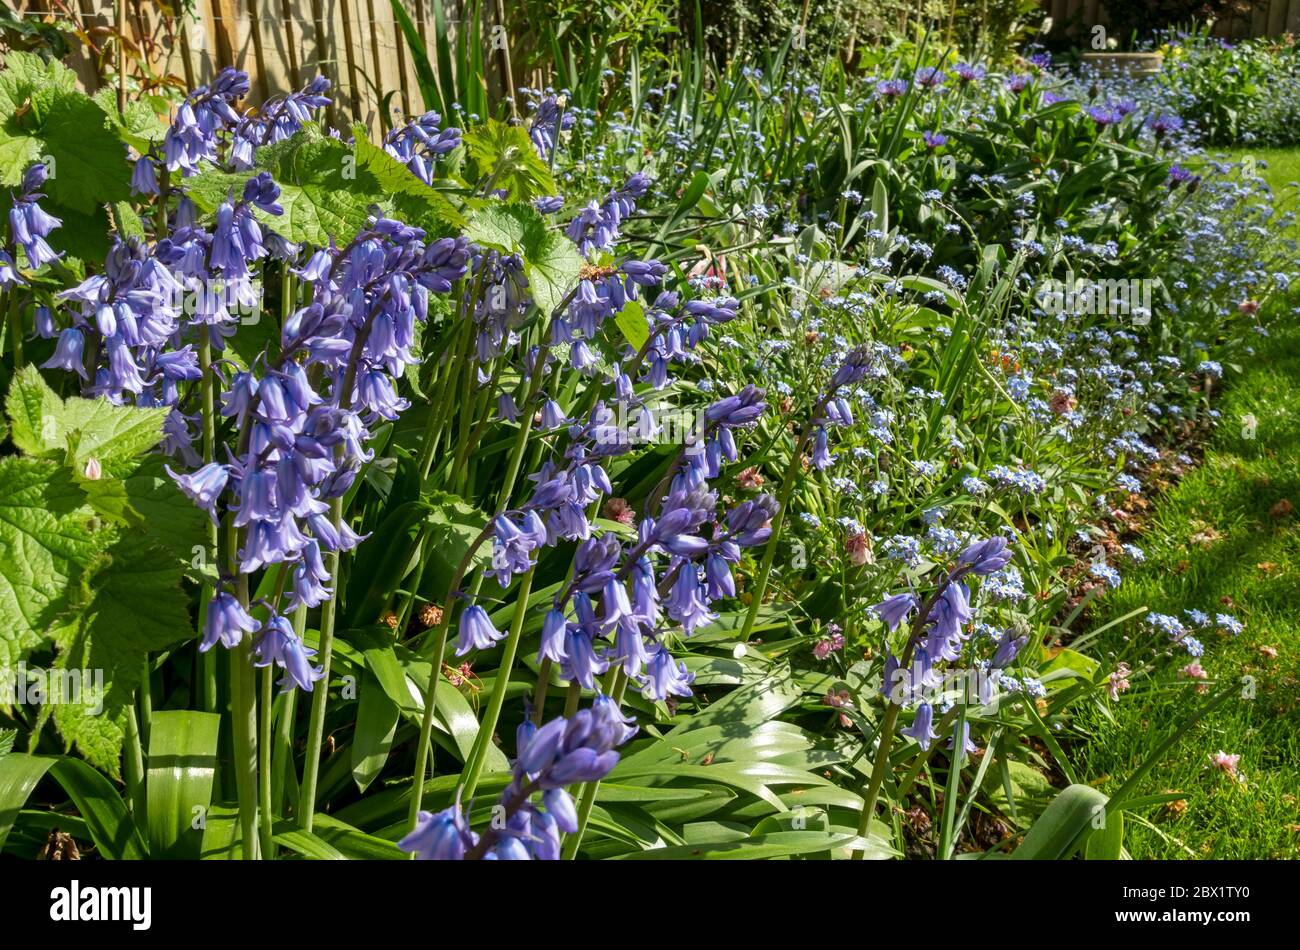 Cultivated bluebell bluebells blue flowering flowers centaurea and forget me nots growing in spring border England UK United Kingdom GB Great Britain Stock Photo